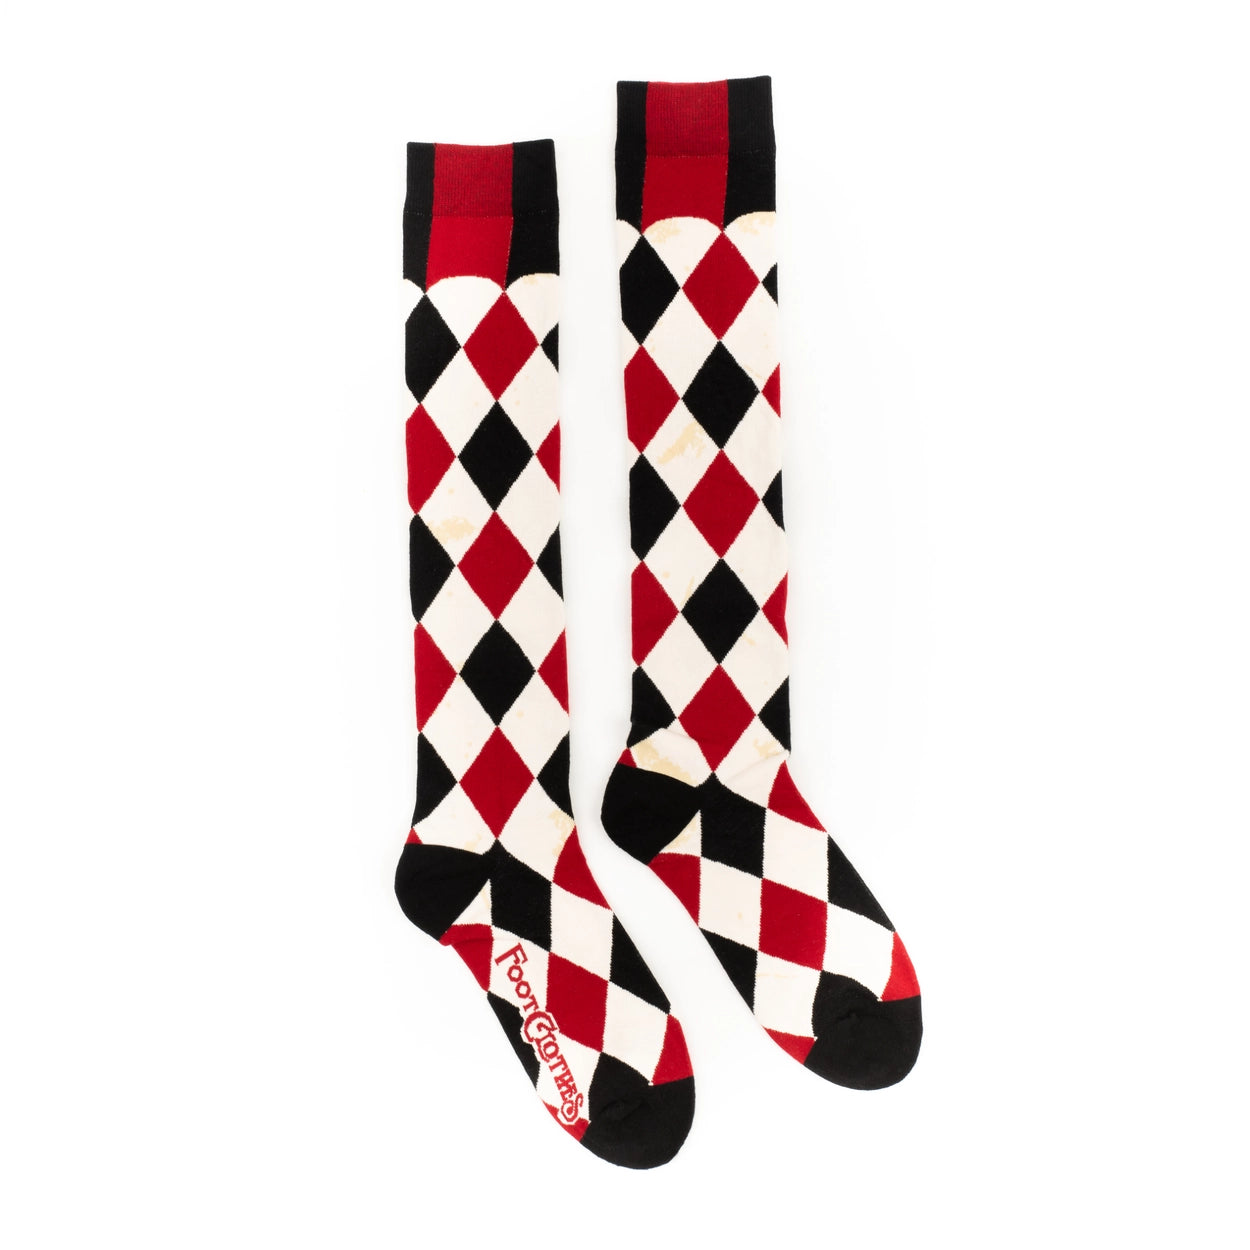 knee socks in a black, red, and cream colored harlequin pattern- with faux-antiqued yellowed age spots throughout each cream colored diamond in the pattern. Shown flat from the side